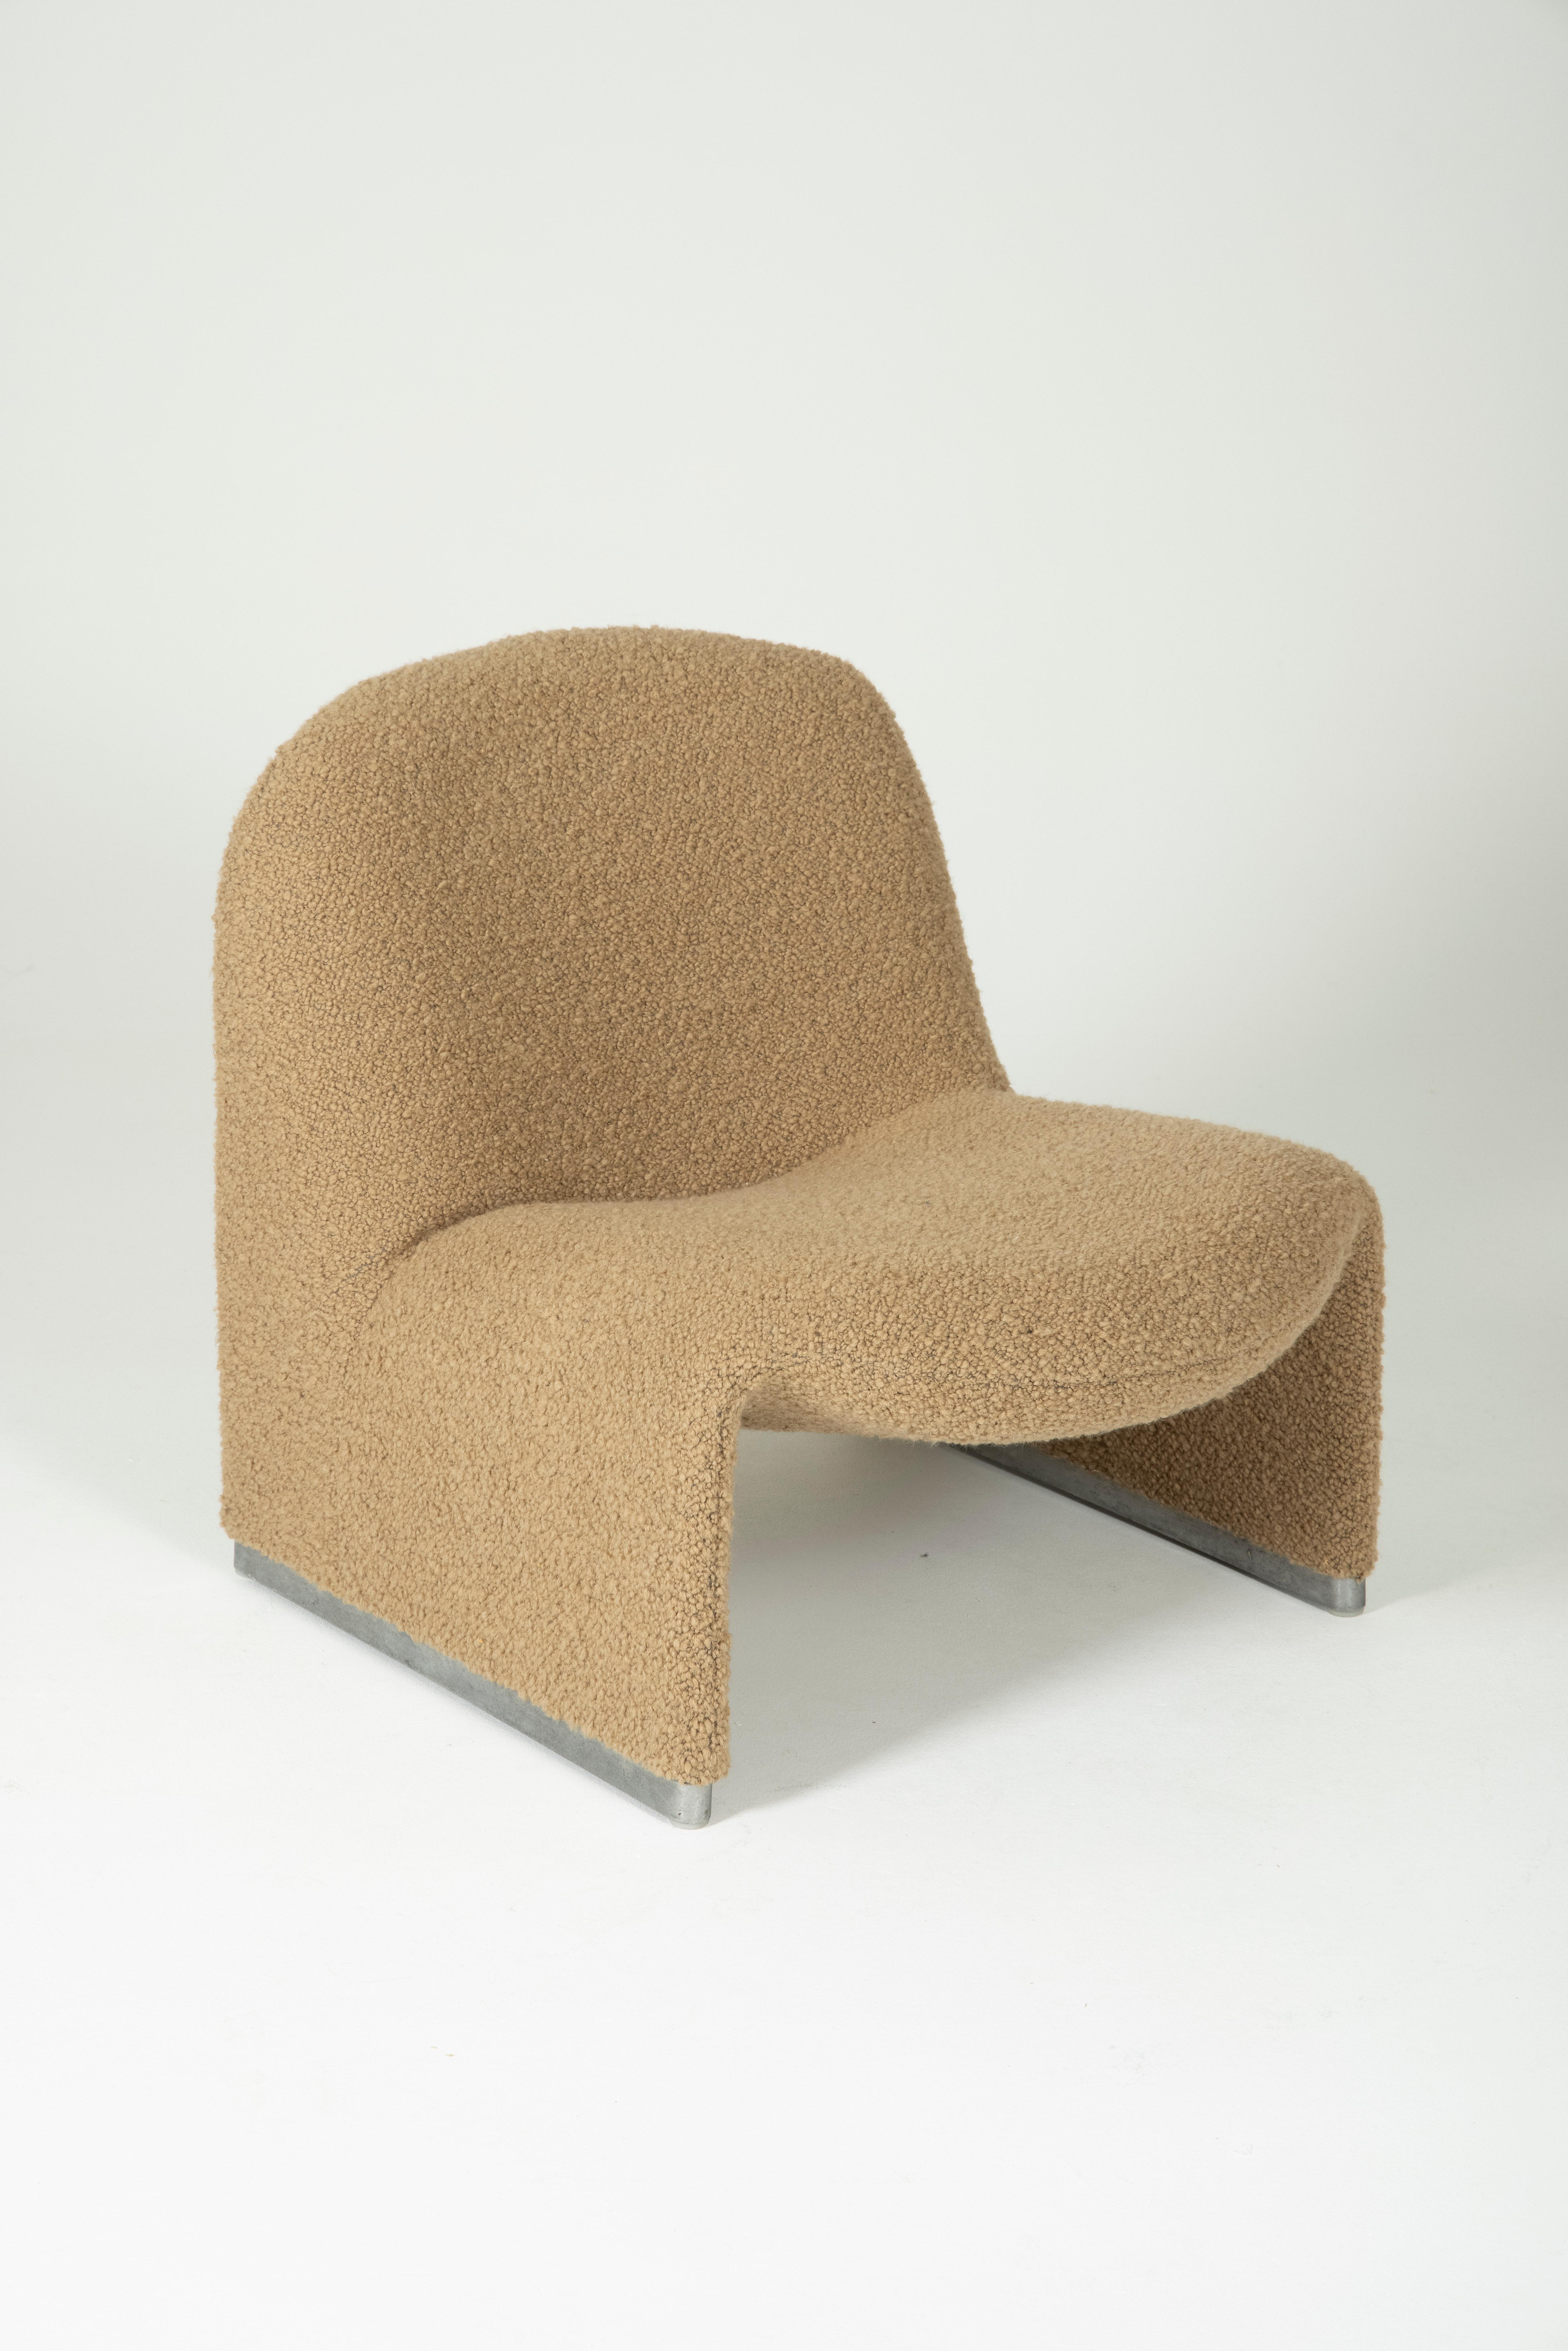 Alky armchair by Italian designer Giancarlo Piretti for Artifort, 1970s. The structure is covered with thermoformed foam, and the base is made of aluminum. Good condition. This armchair has been reupholstered with a high-end bouclé fabric in shades